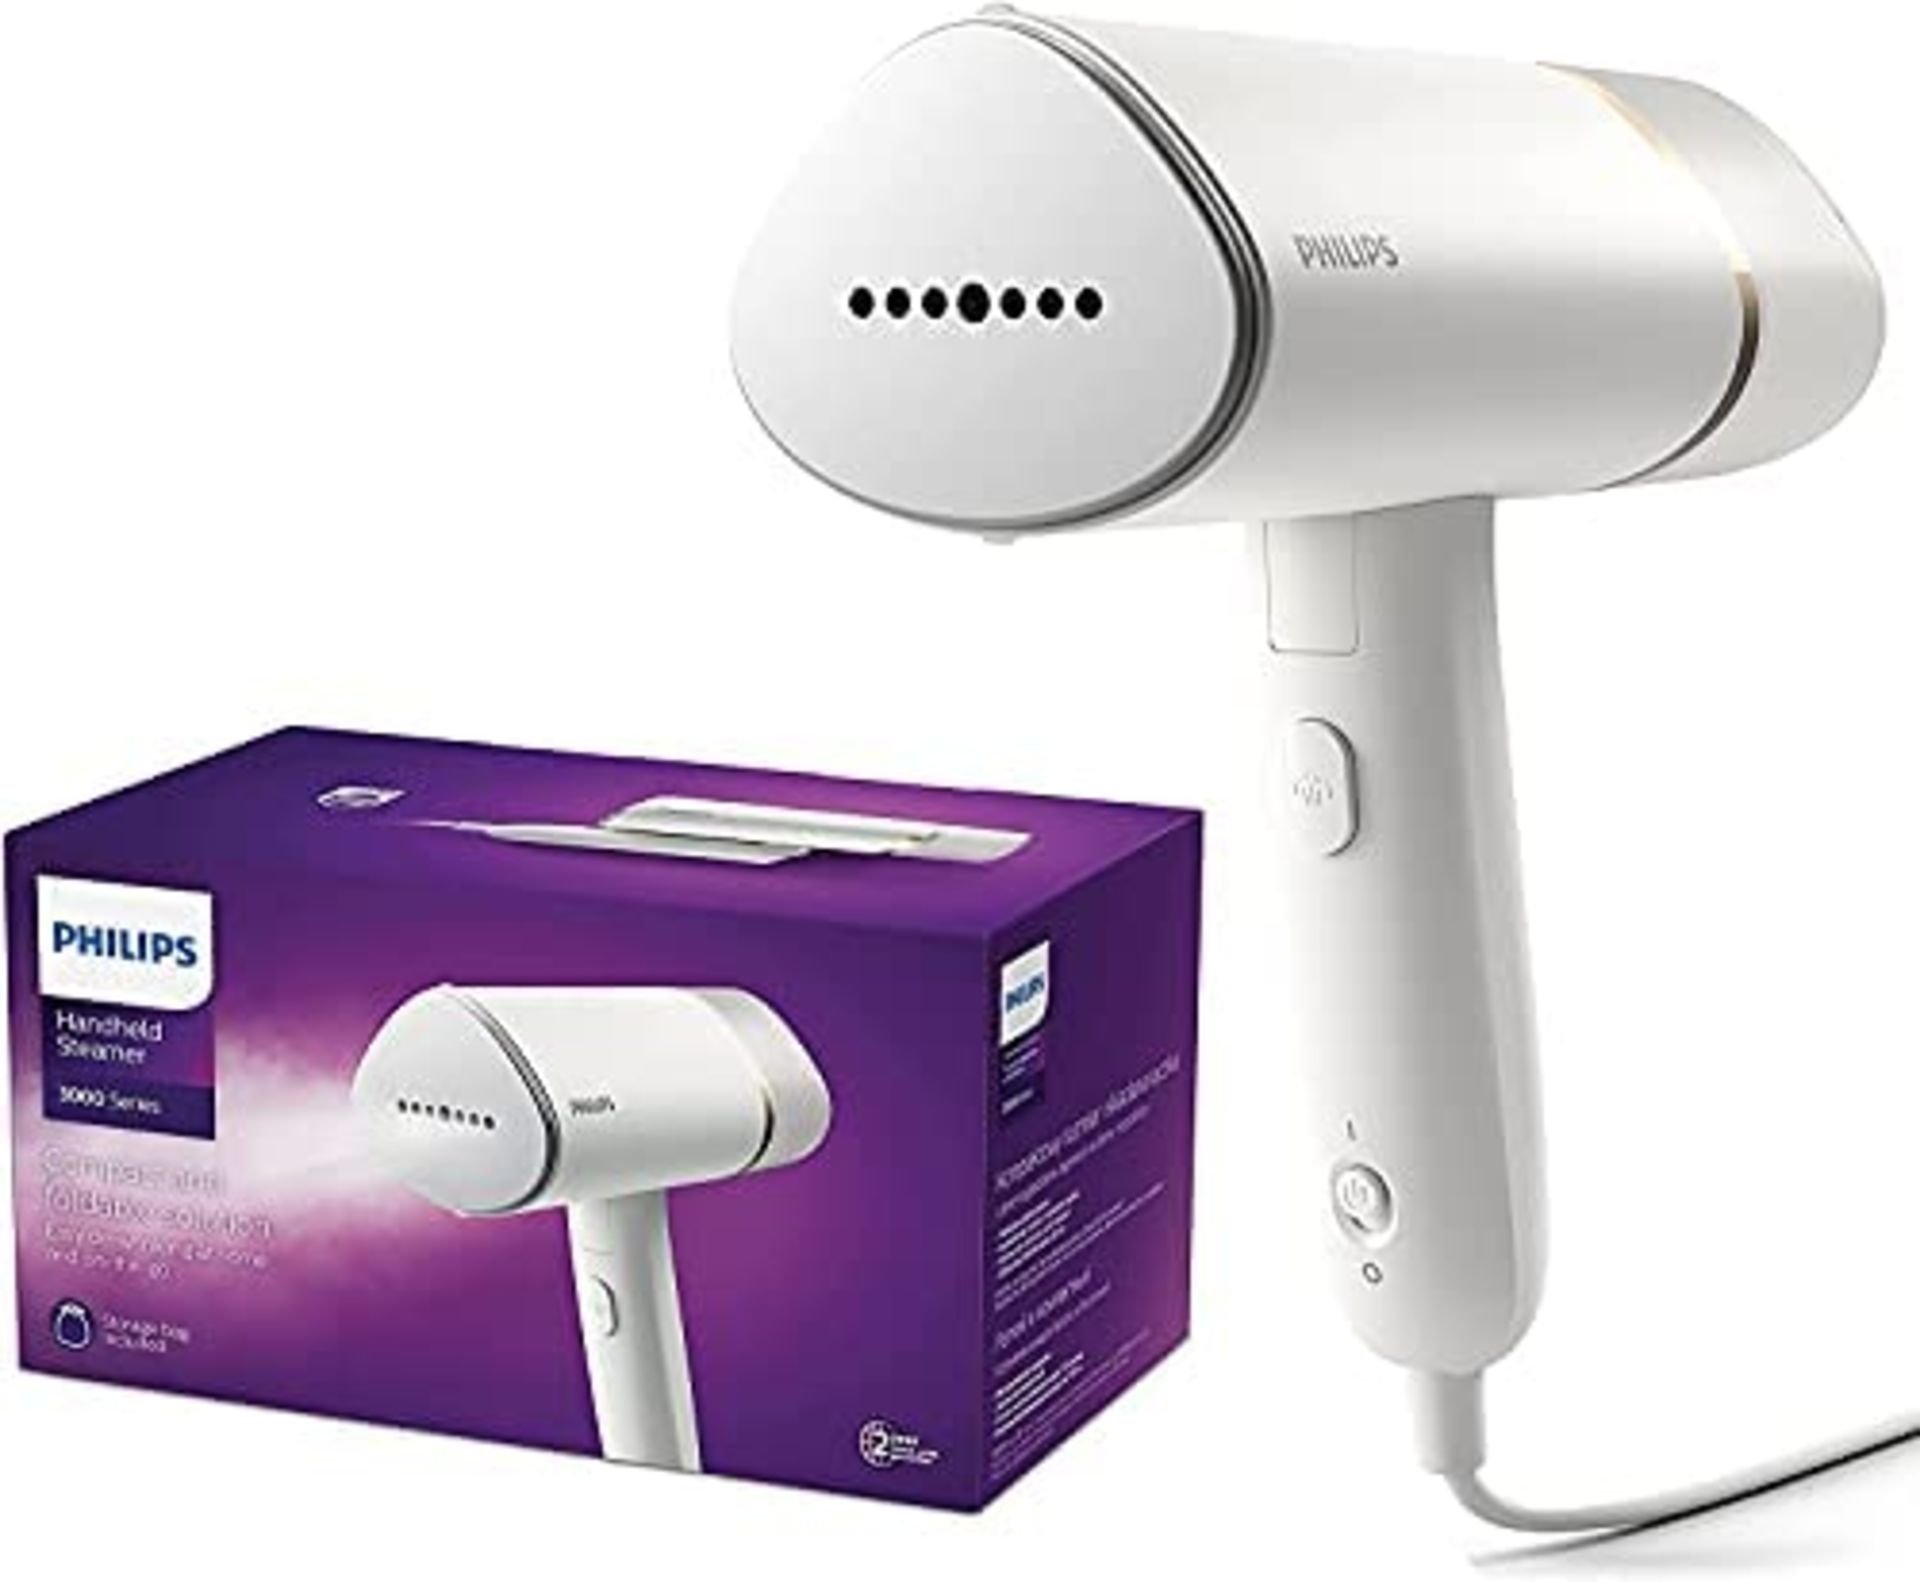 RRP -£42.49 Philips Handheld Steamer 3000 Series, Compact and Foldable